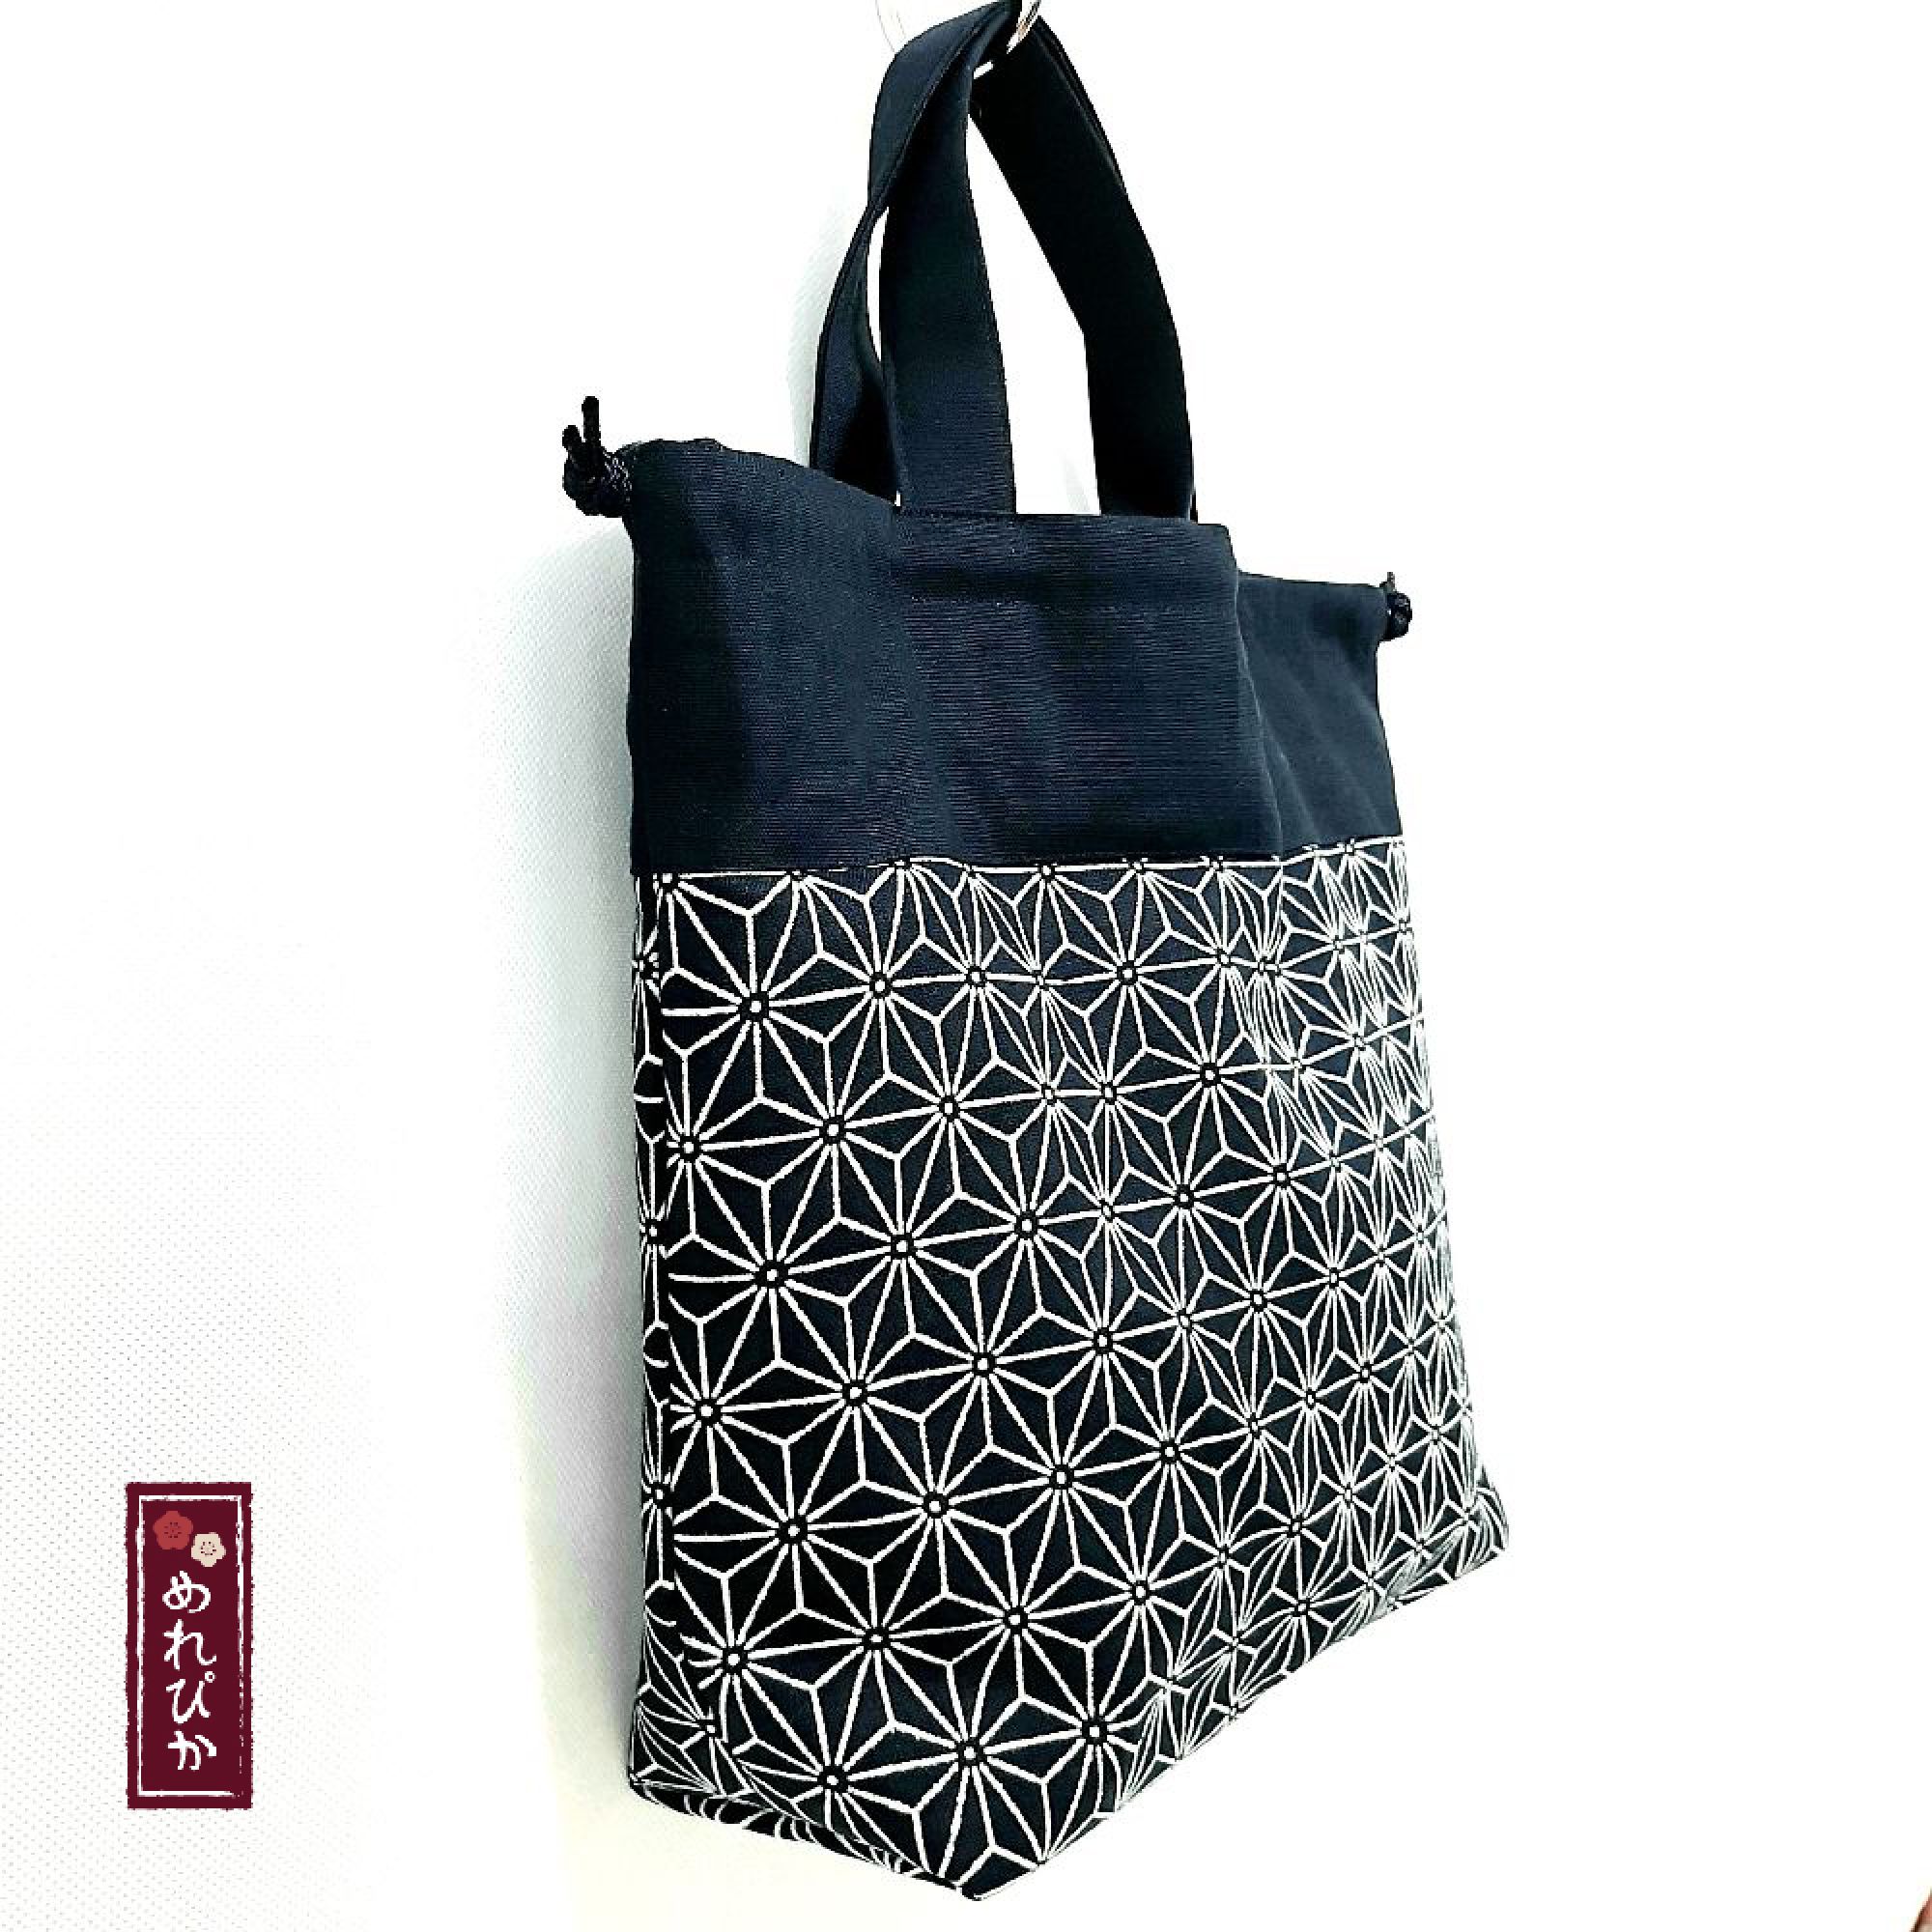 “Bag” in Japanese – An accessory for your belongings